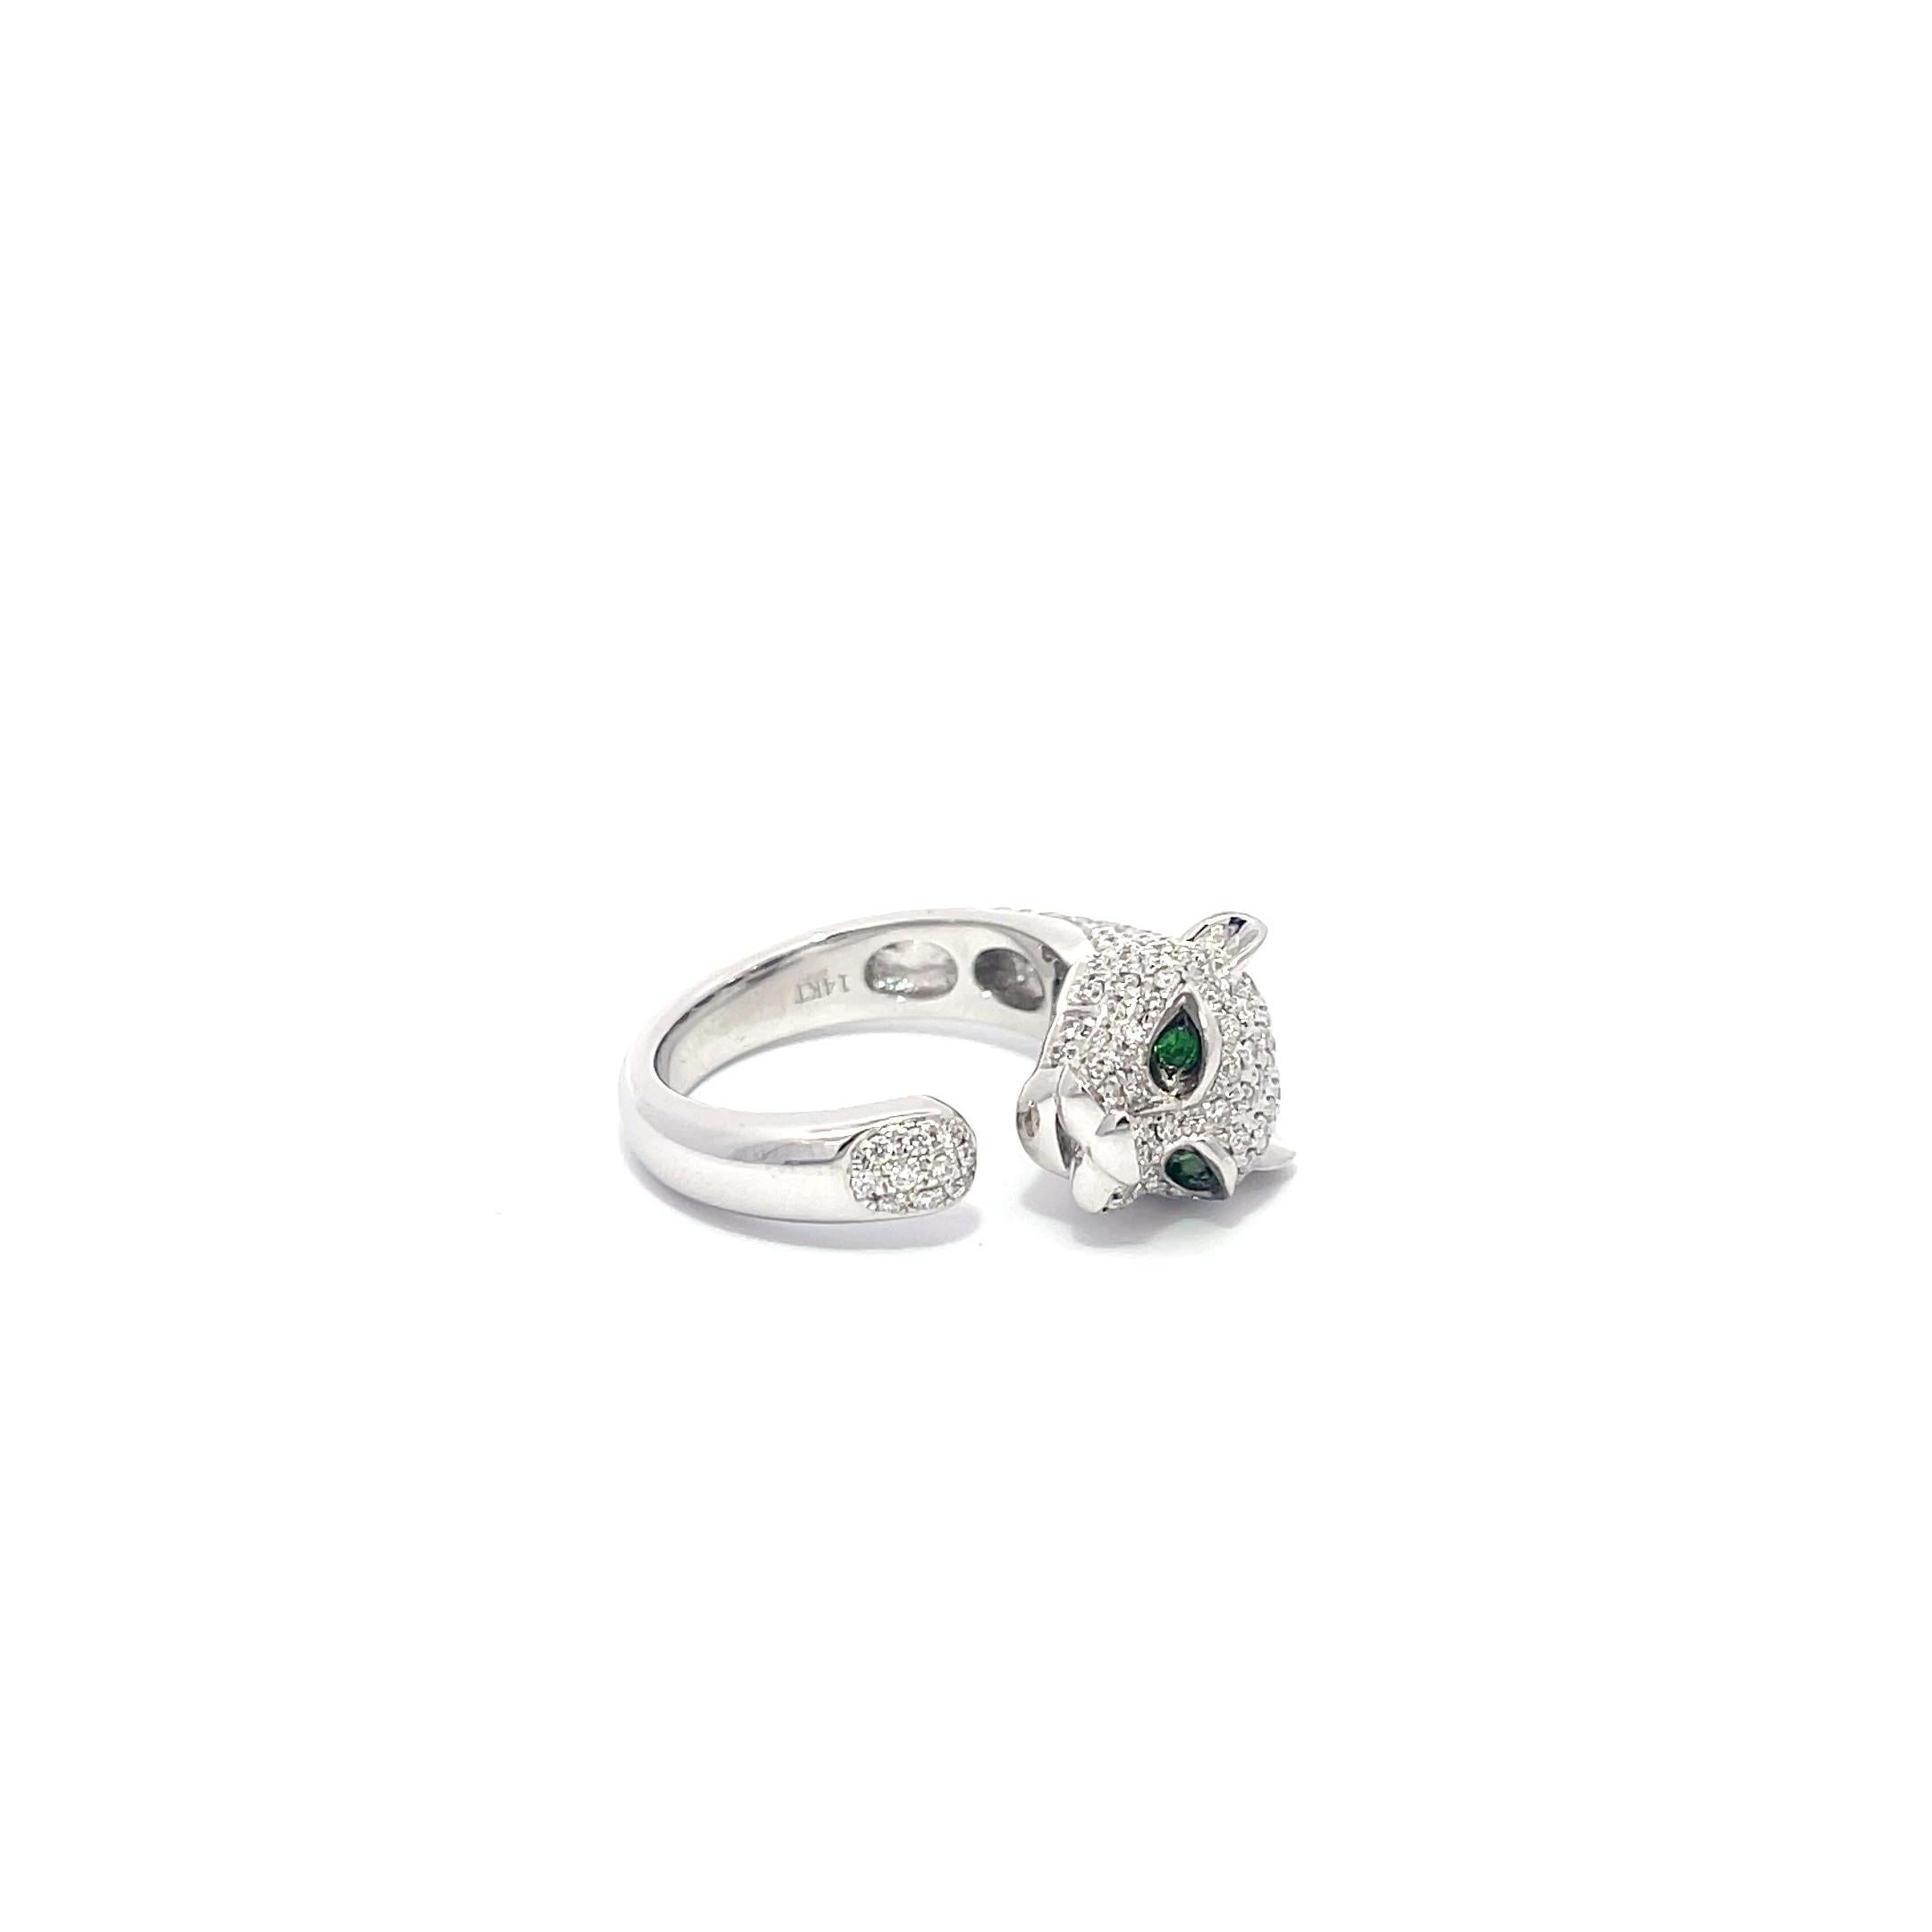 Diamond and Emerald Panther Ring in 14K White Gold. The ring features 1.02ctw of brilliant round cut diamonds and 0.04ctw emeralds. The ring is size 7 and weighs 8 grams.